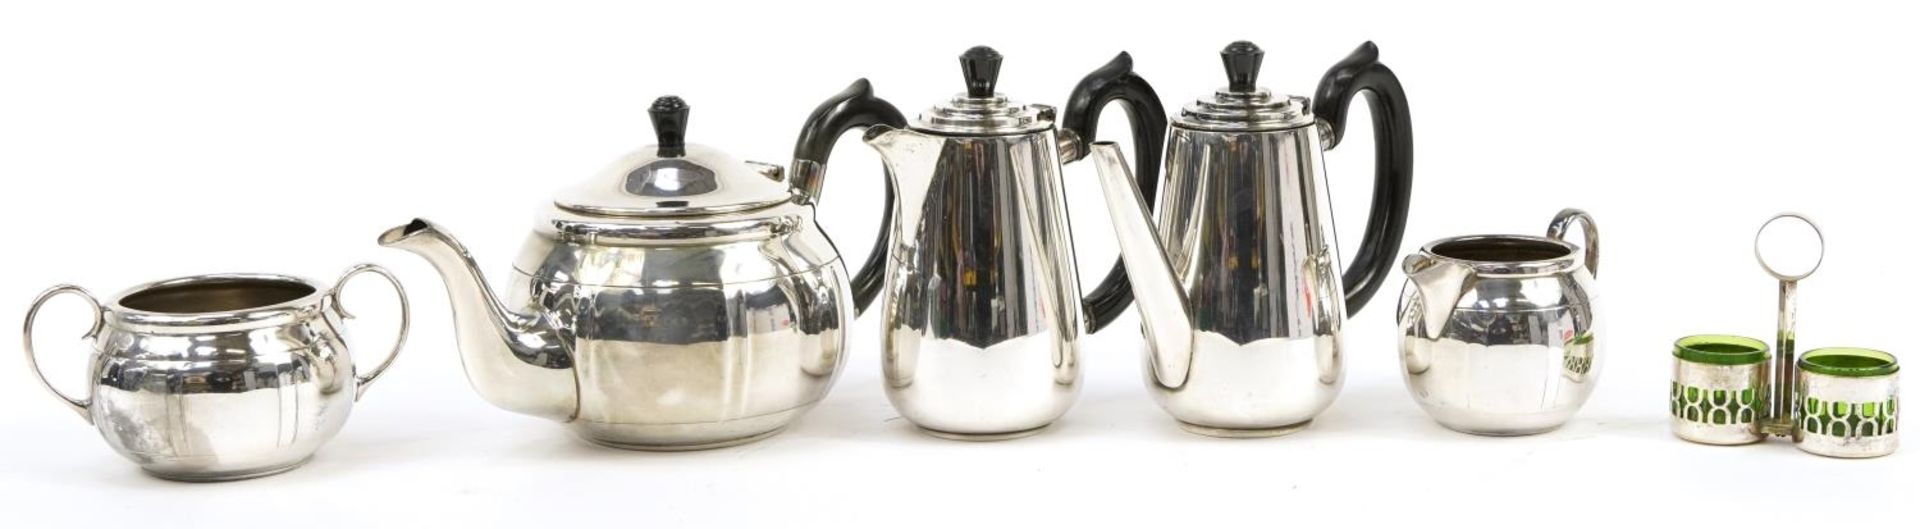 Silver plated items including a Modernist three piece tea set and matching water pot and coffee - Image 6 of 11